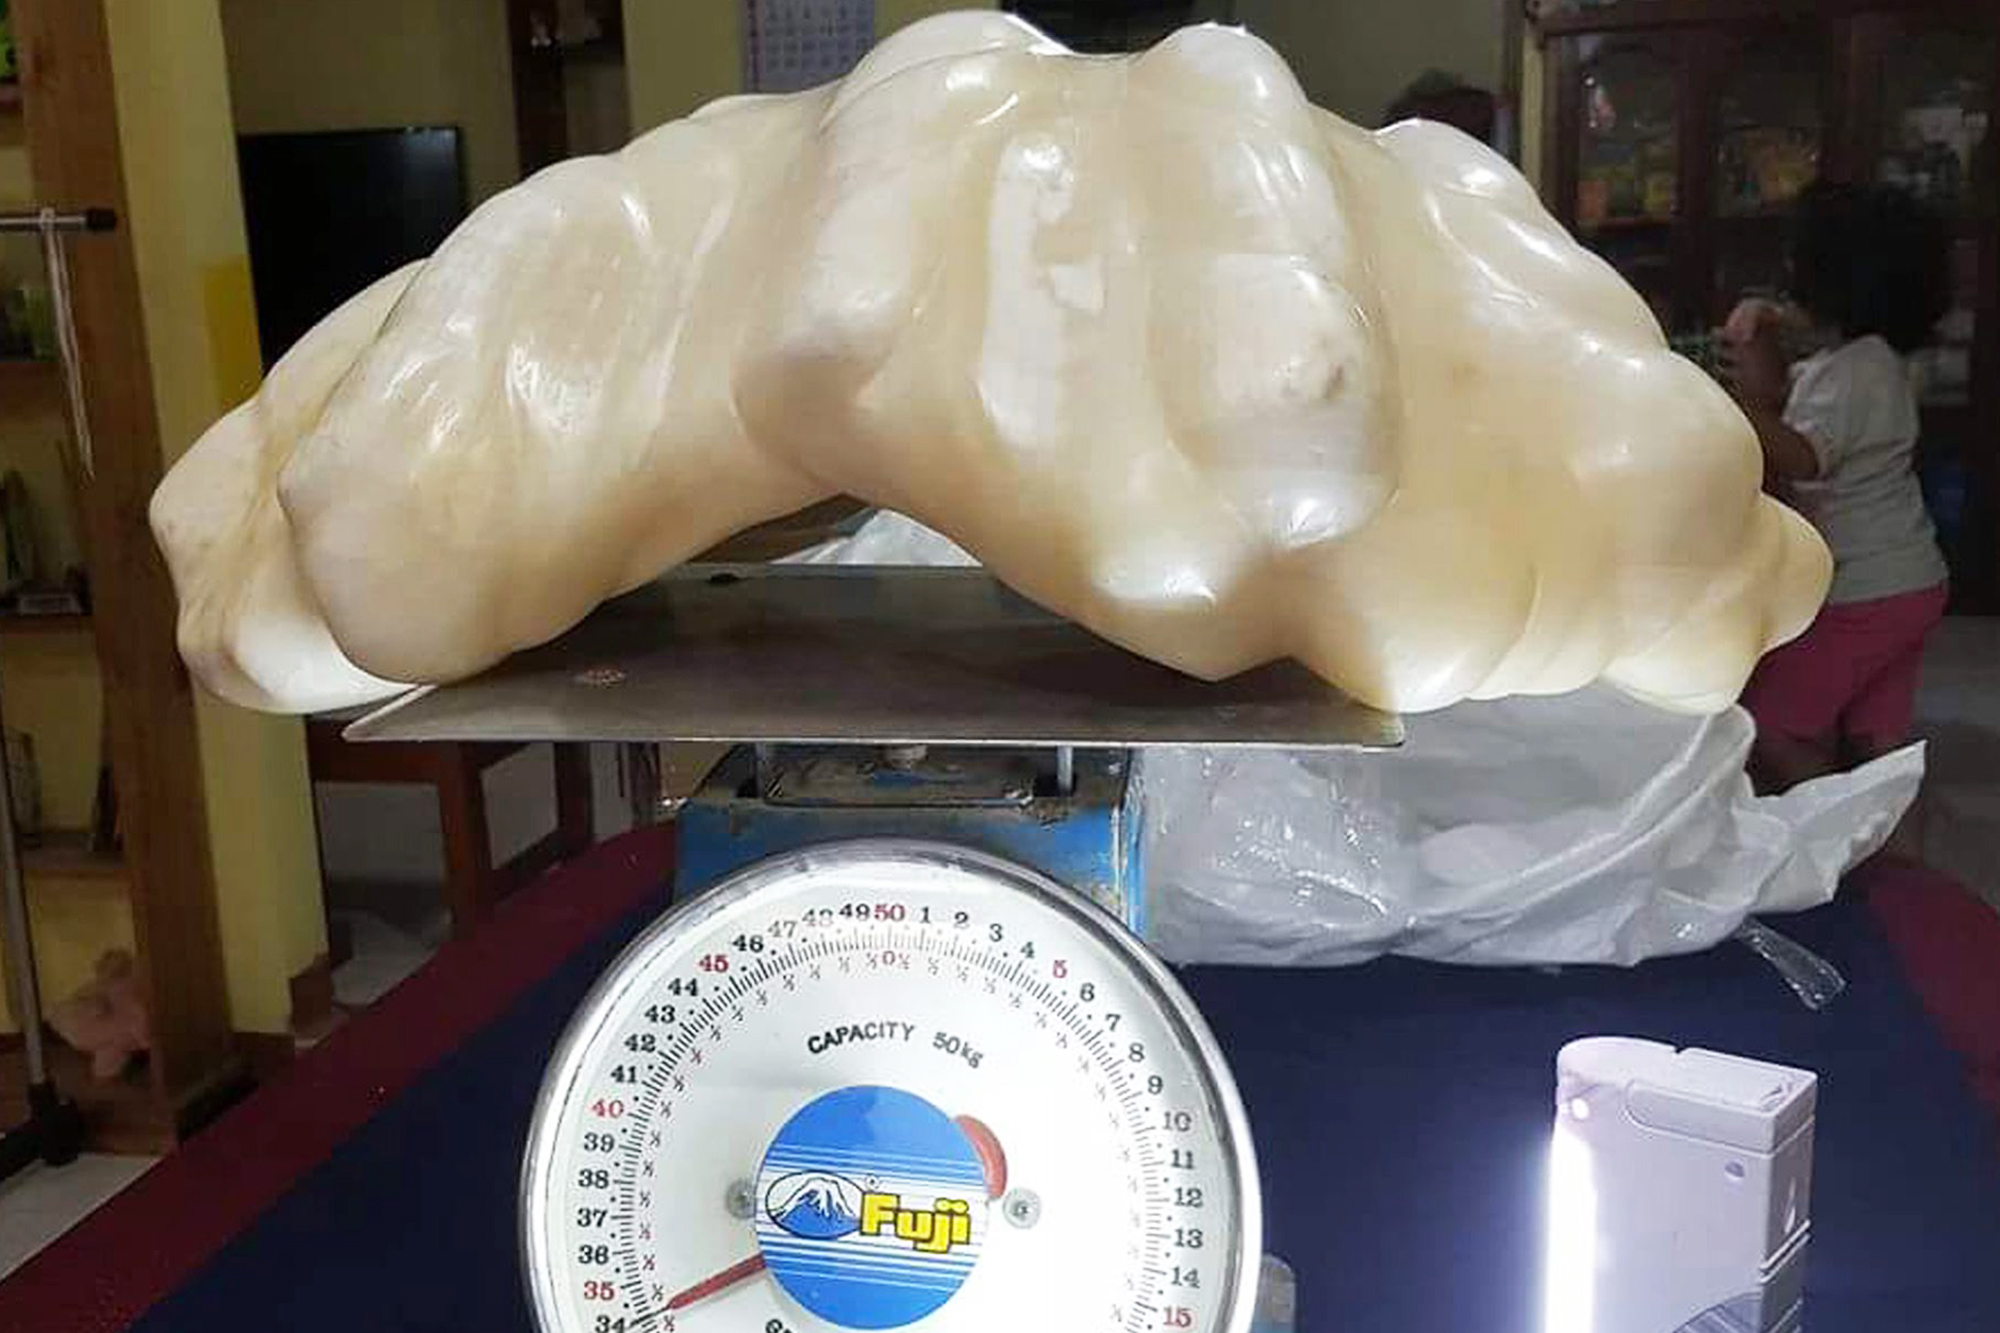 A fisherman kept this $100M pearl under his bed for 10 years